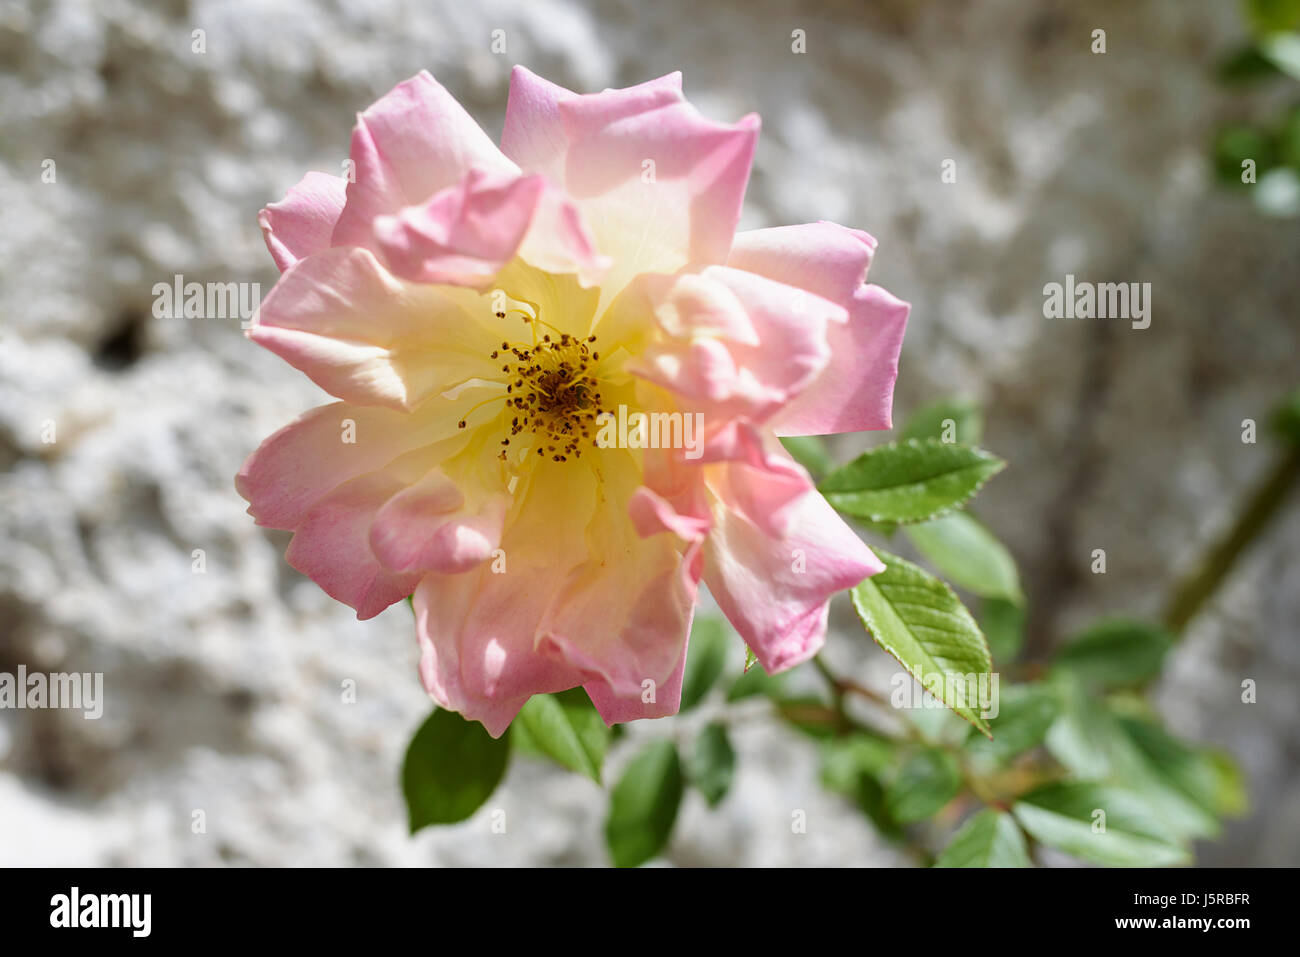 Rose 'Peace' Rosa 'Peace', Pink fringed flower growing outdoor. Stock Photo